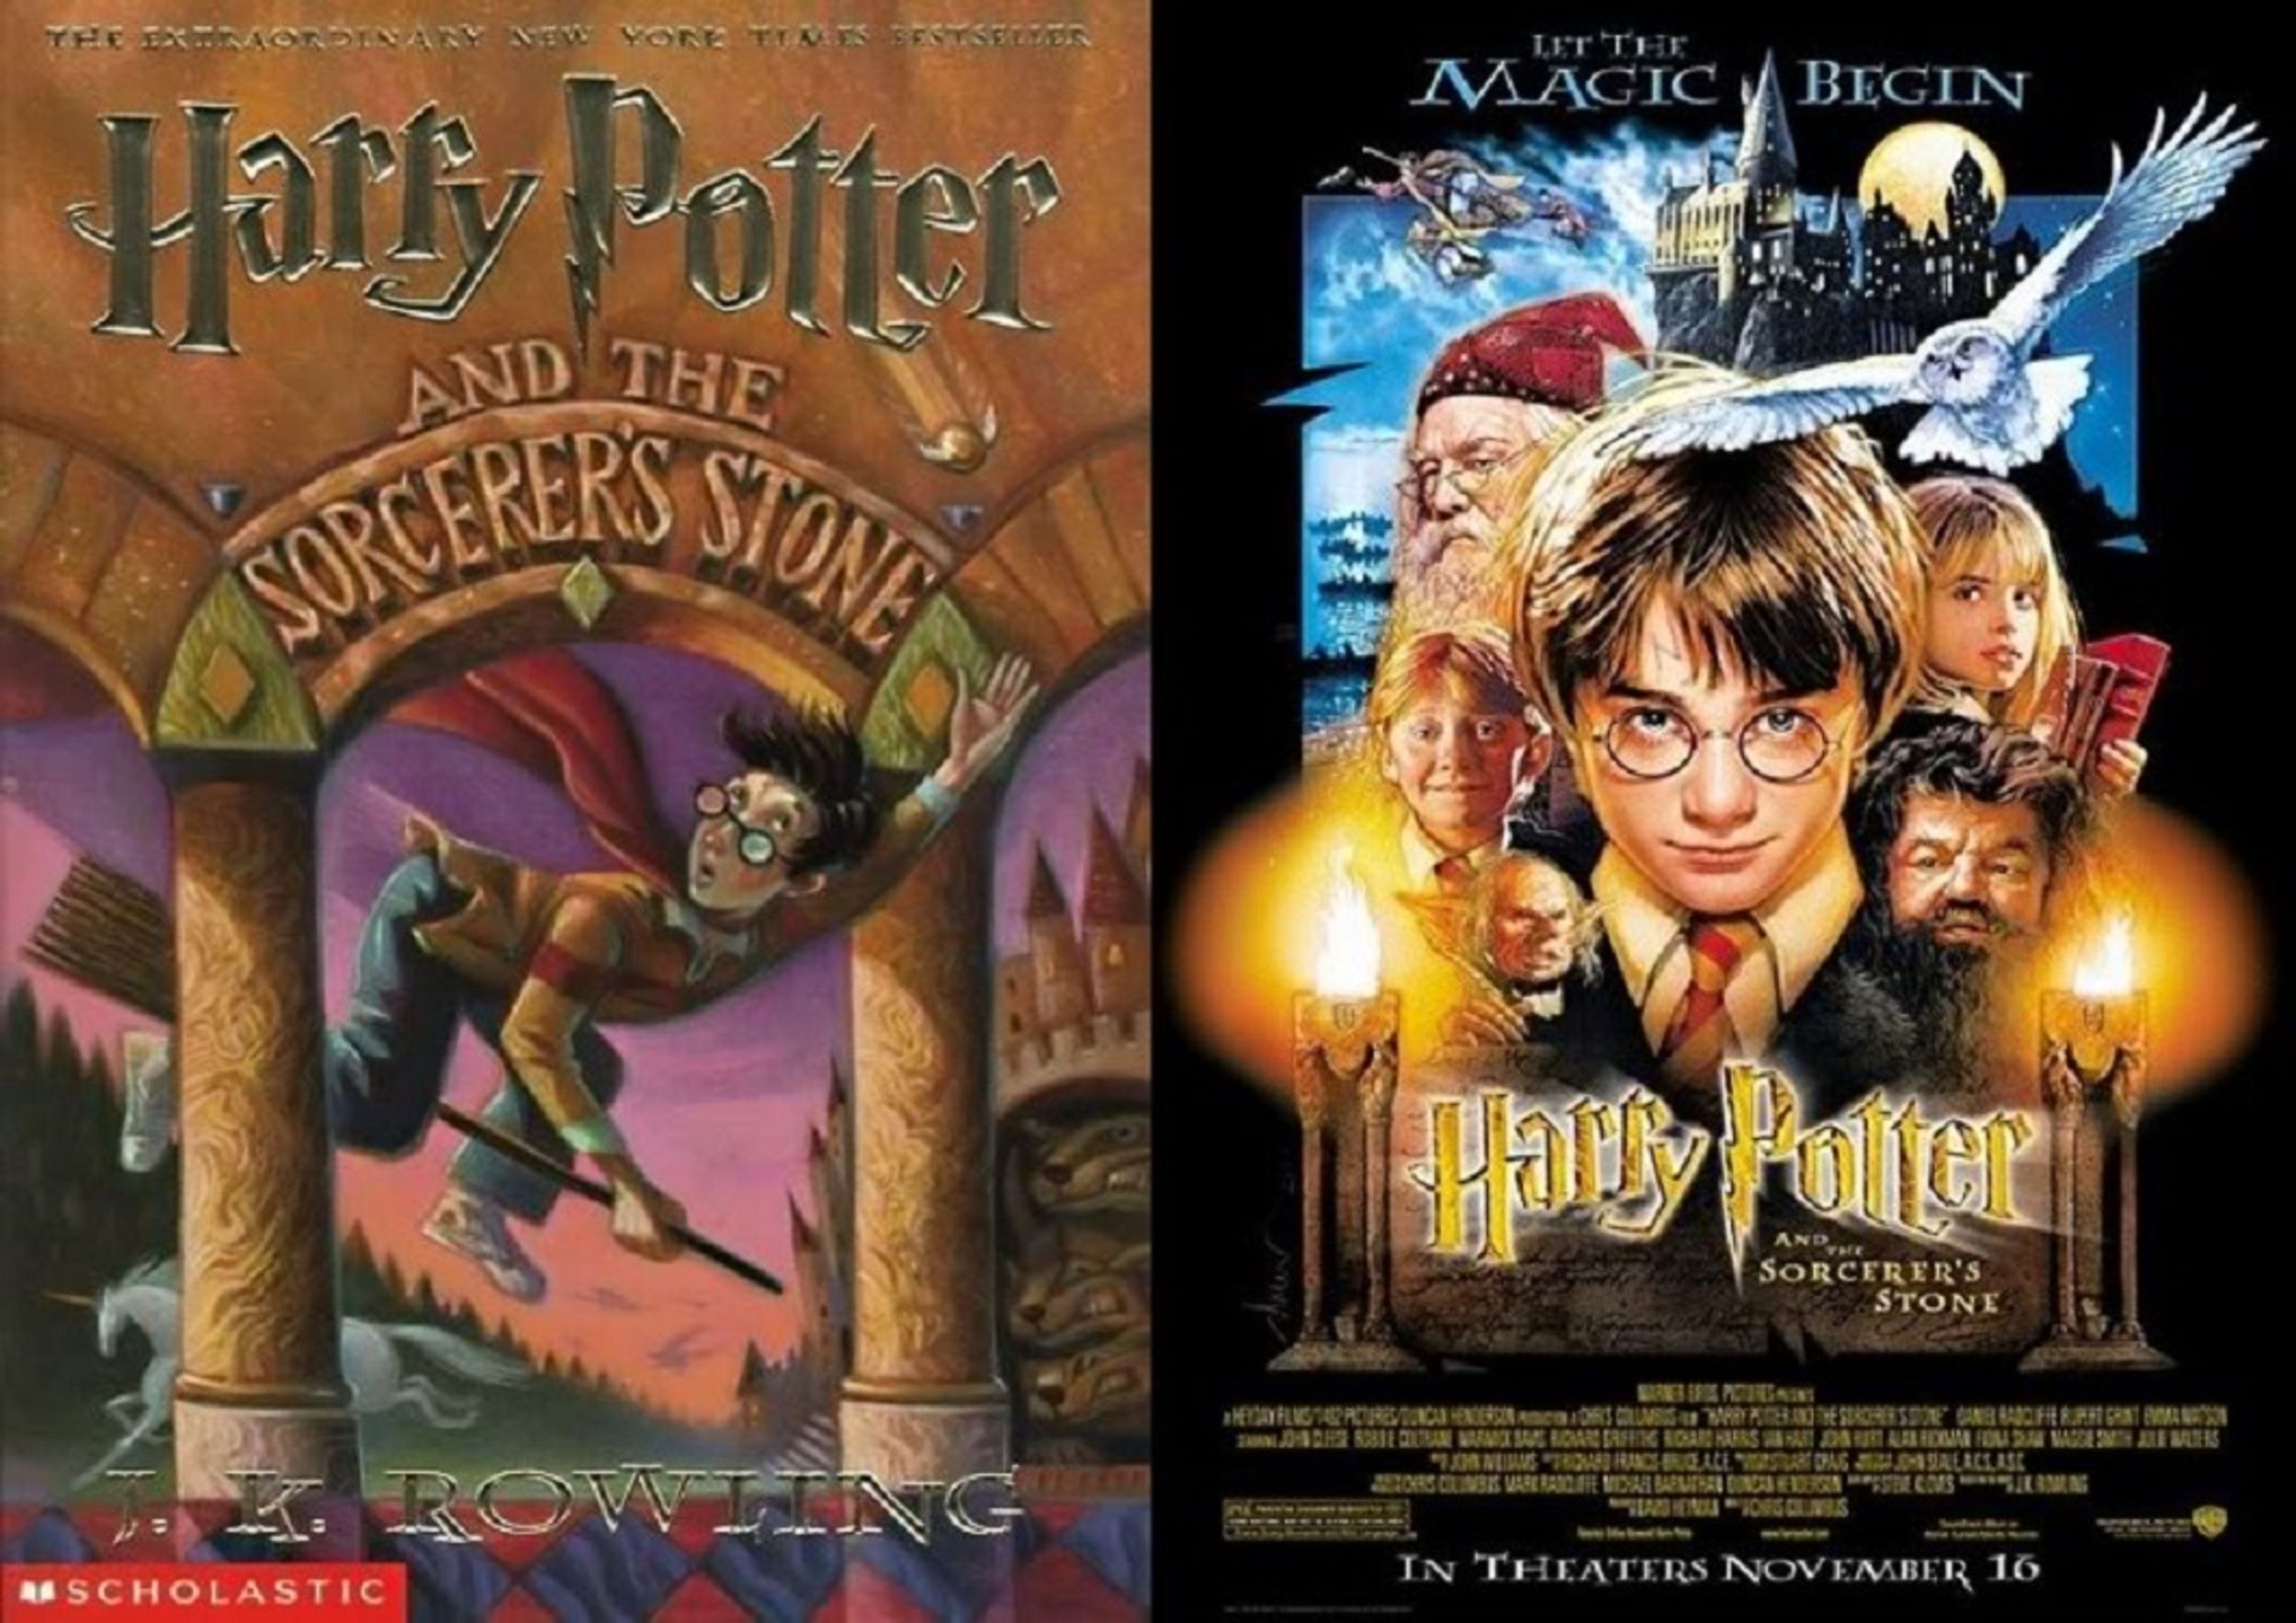 10 Things Missing From The Harry Potter Movies (Part 1)